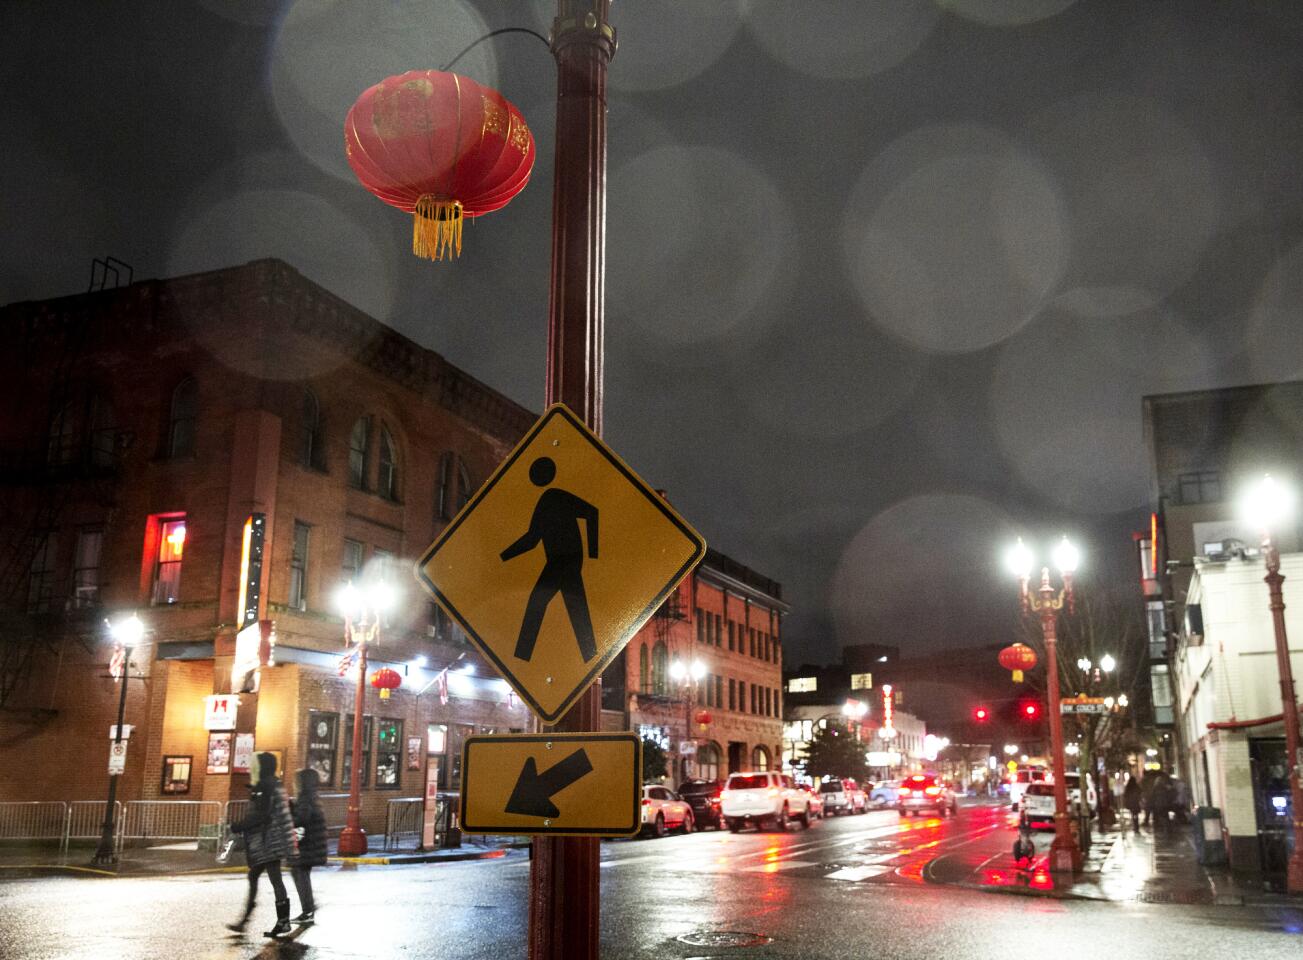 Strolling Portland's Chinatown on a wet Monday.